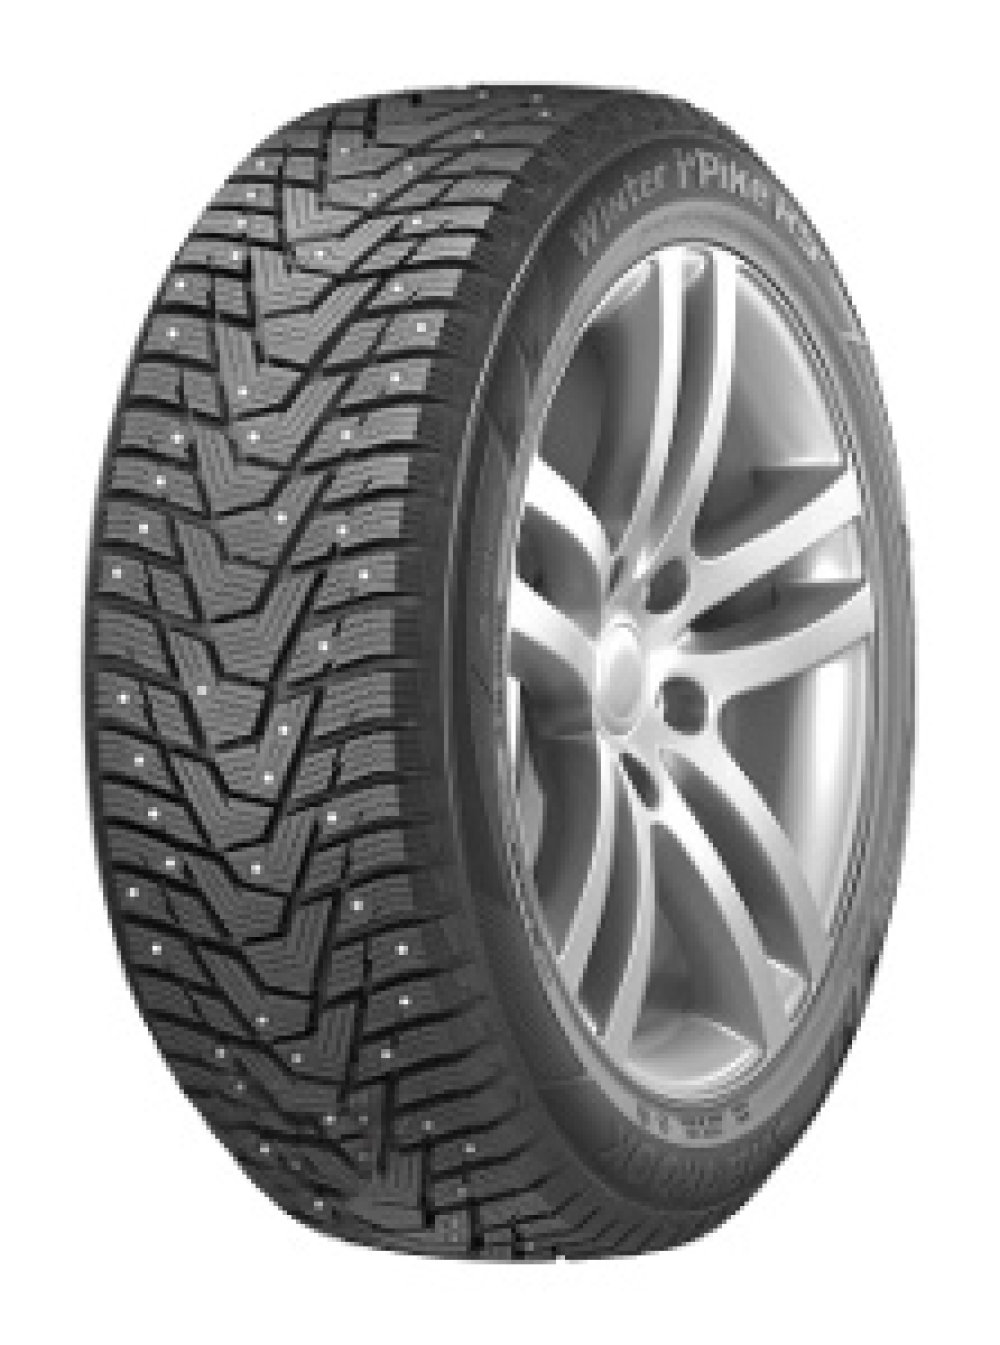 Image of Hankook Winter I*Pike RS2 W429 ( 215/65 R15 100T XL, pneumatico chiodato SBL )